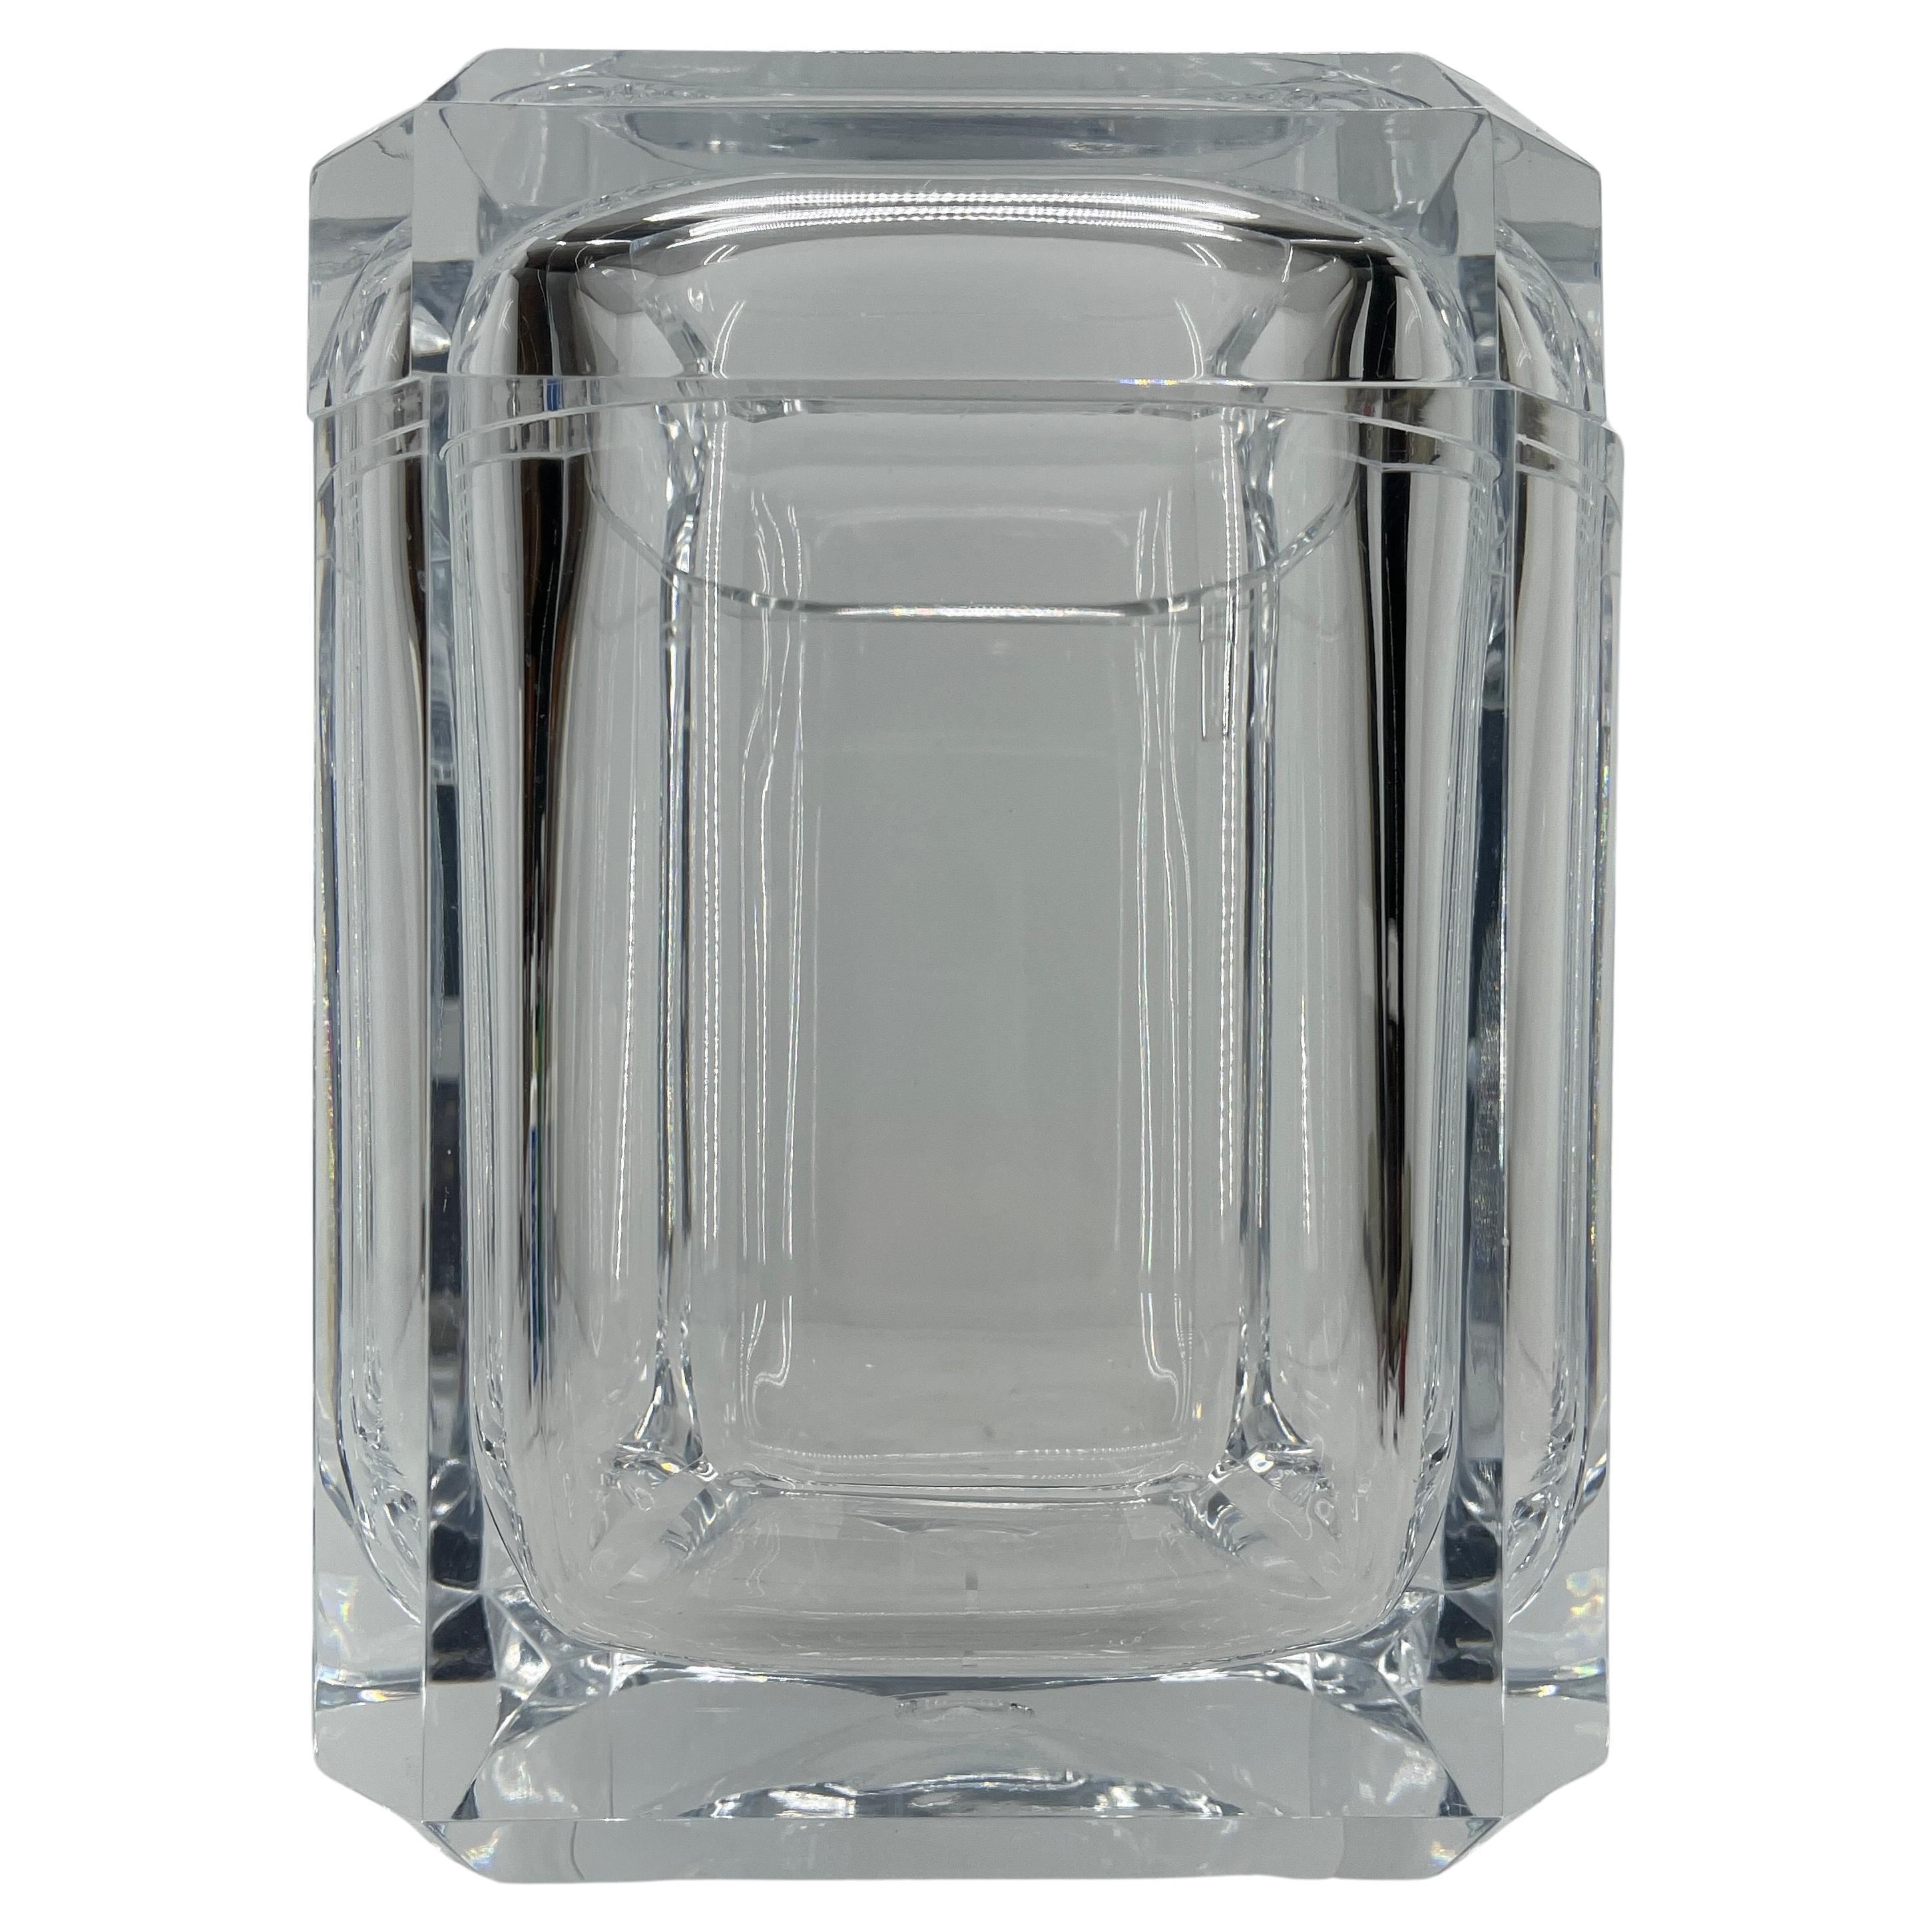 Vintage Ice cube bucket in thick lucite. Beautiful and functional ice bucket with sliding top is an outstanding addition to any bar. The lucite is in very good condition and will keep your ice cold for your cocktail parties. Beautiful statement